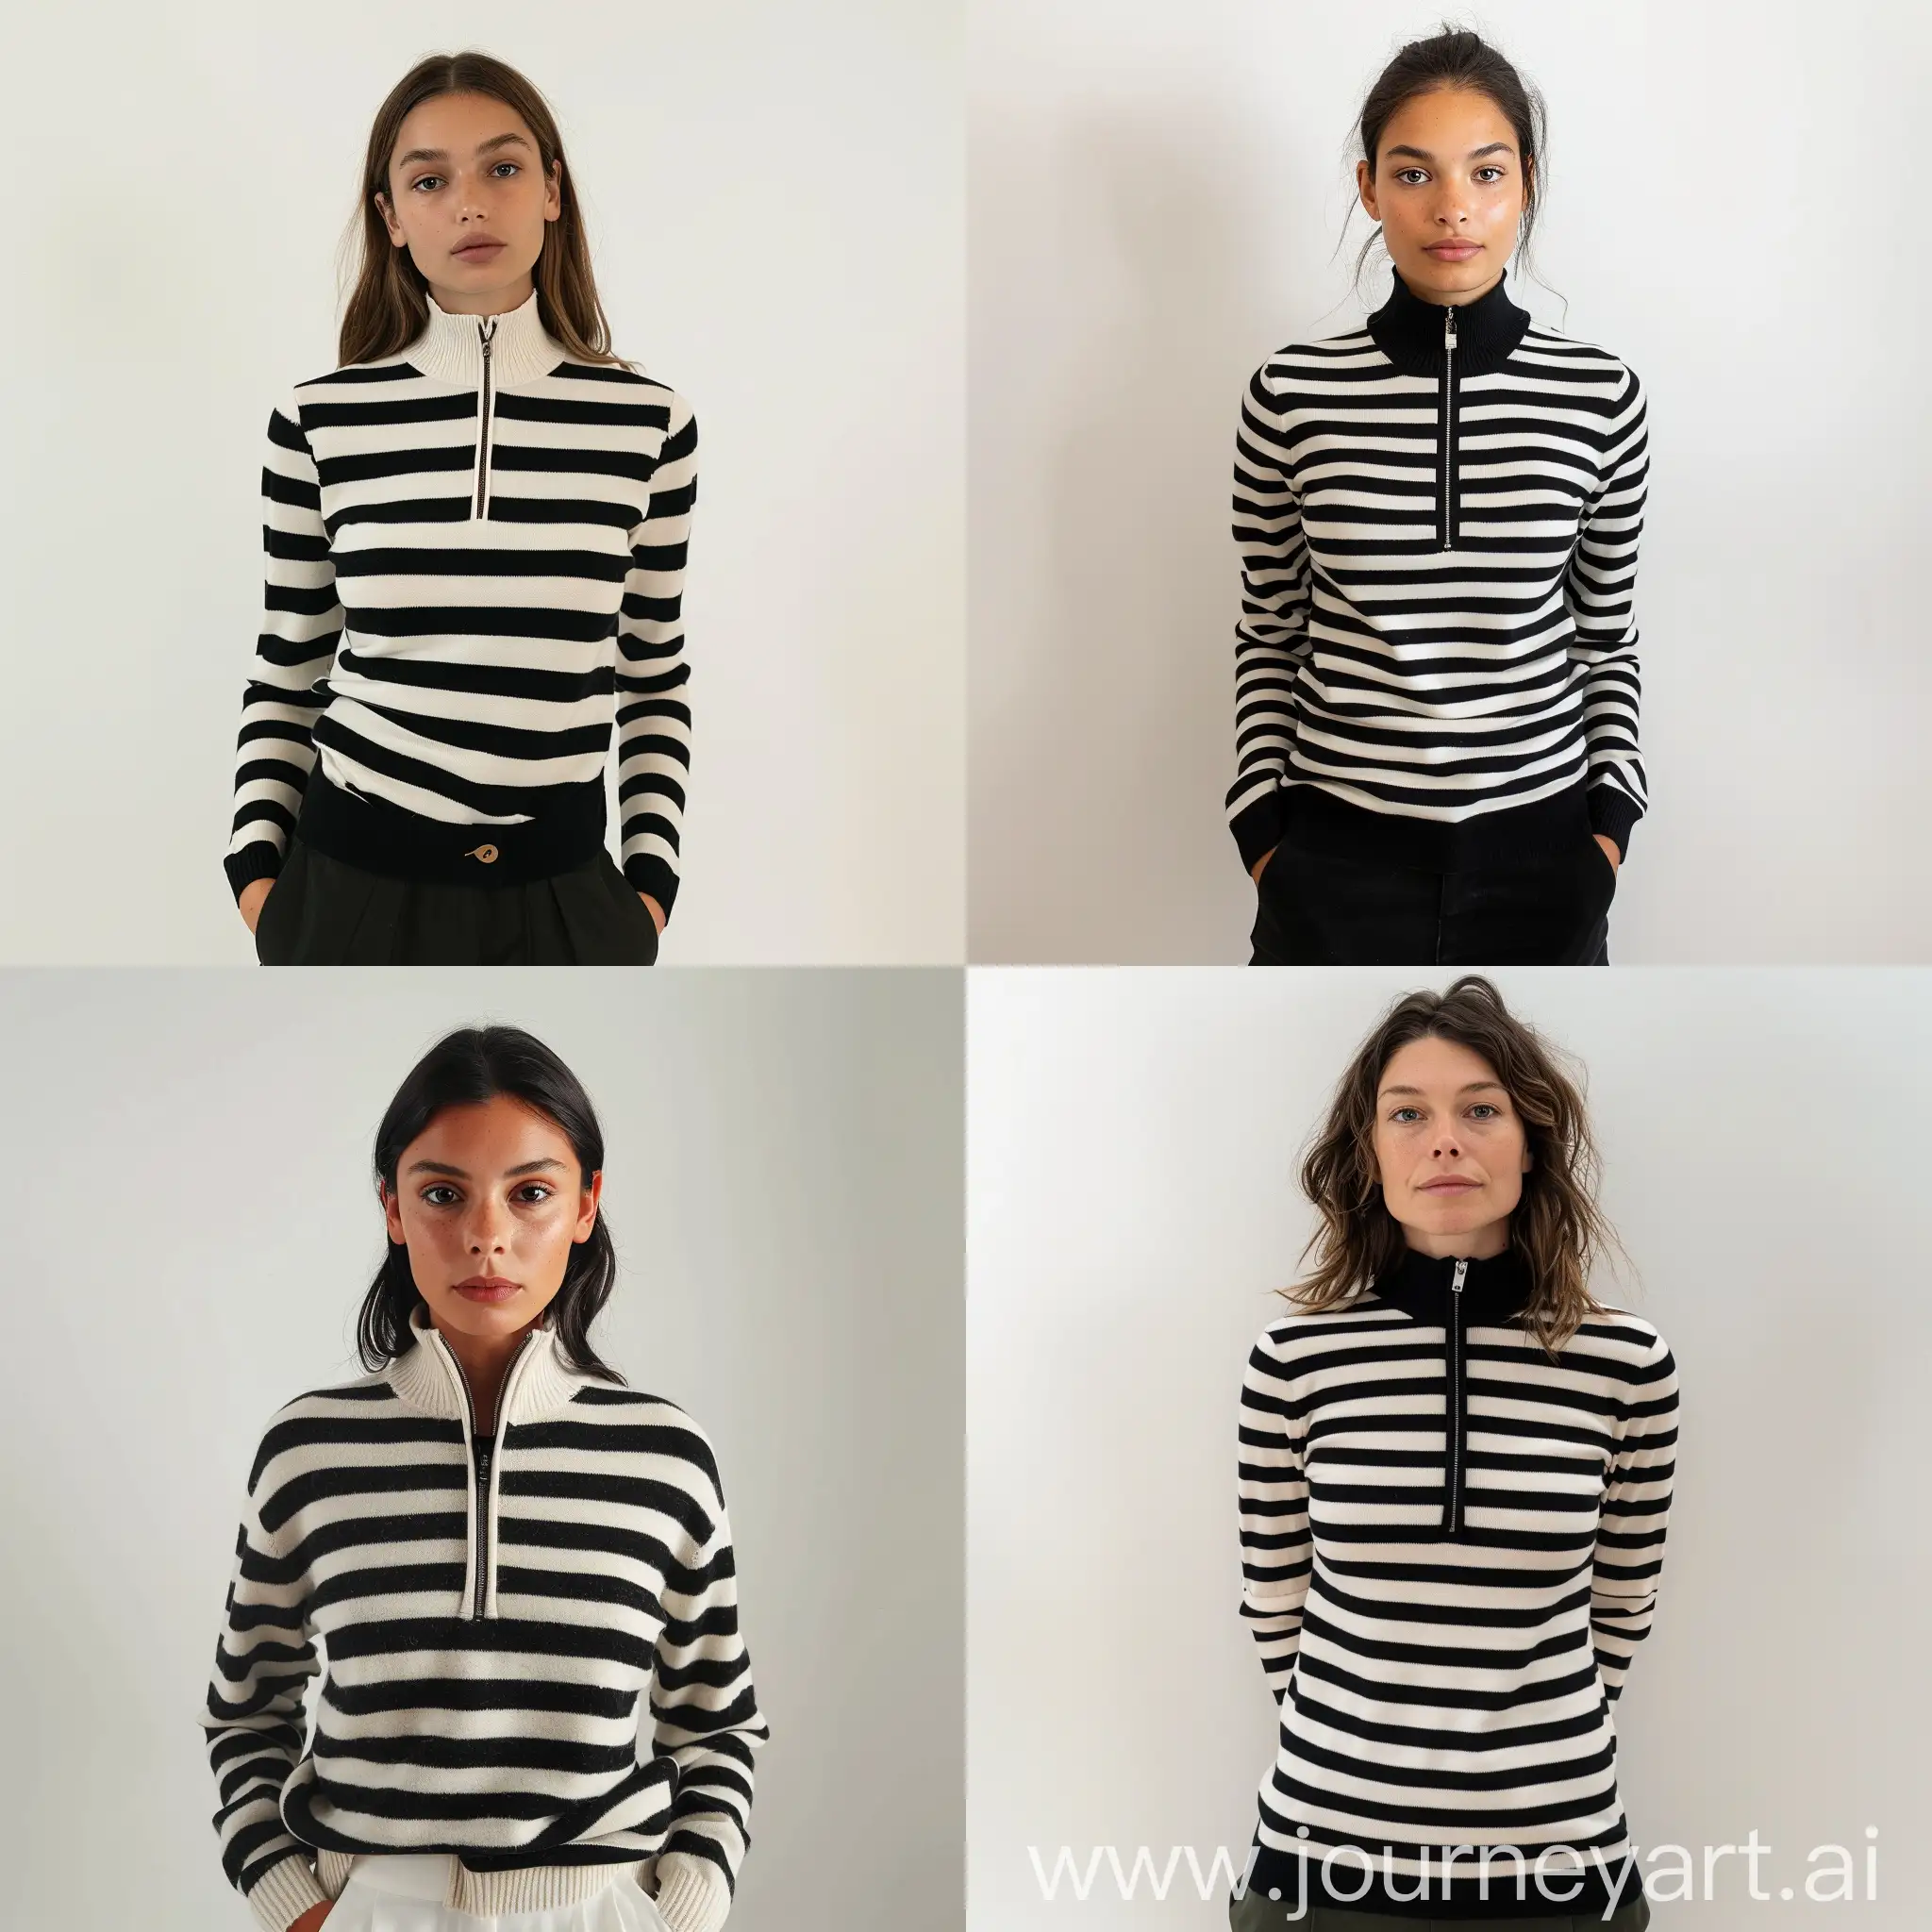 Fashionable-Female-Model-in-Black-and-White-Striped-Cashmere-Sweater